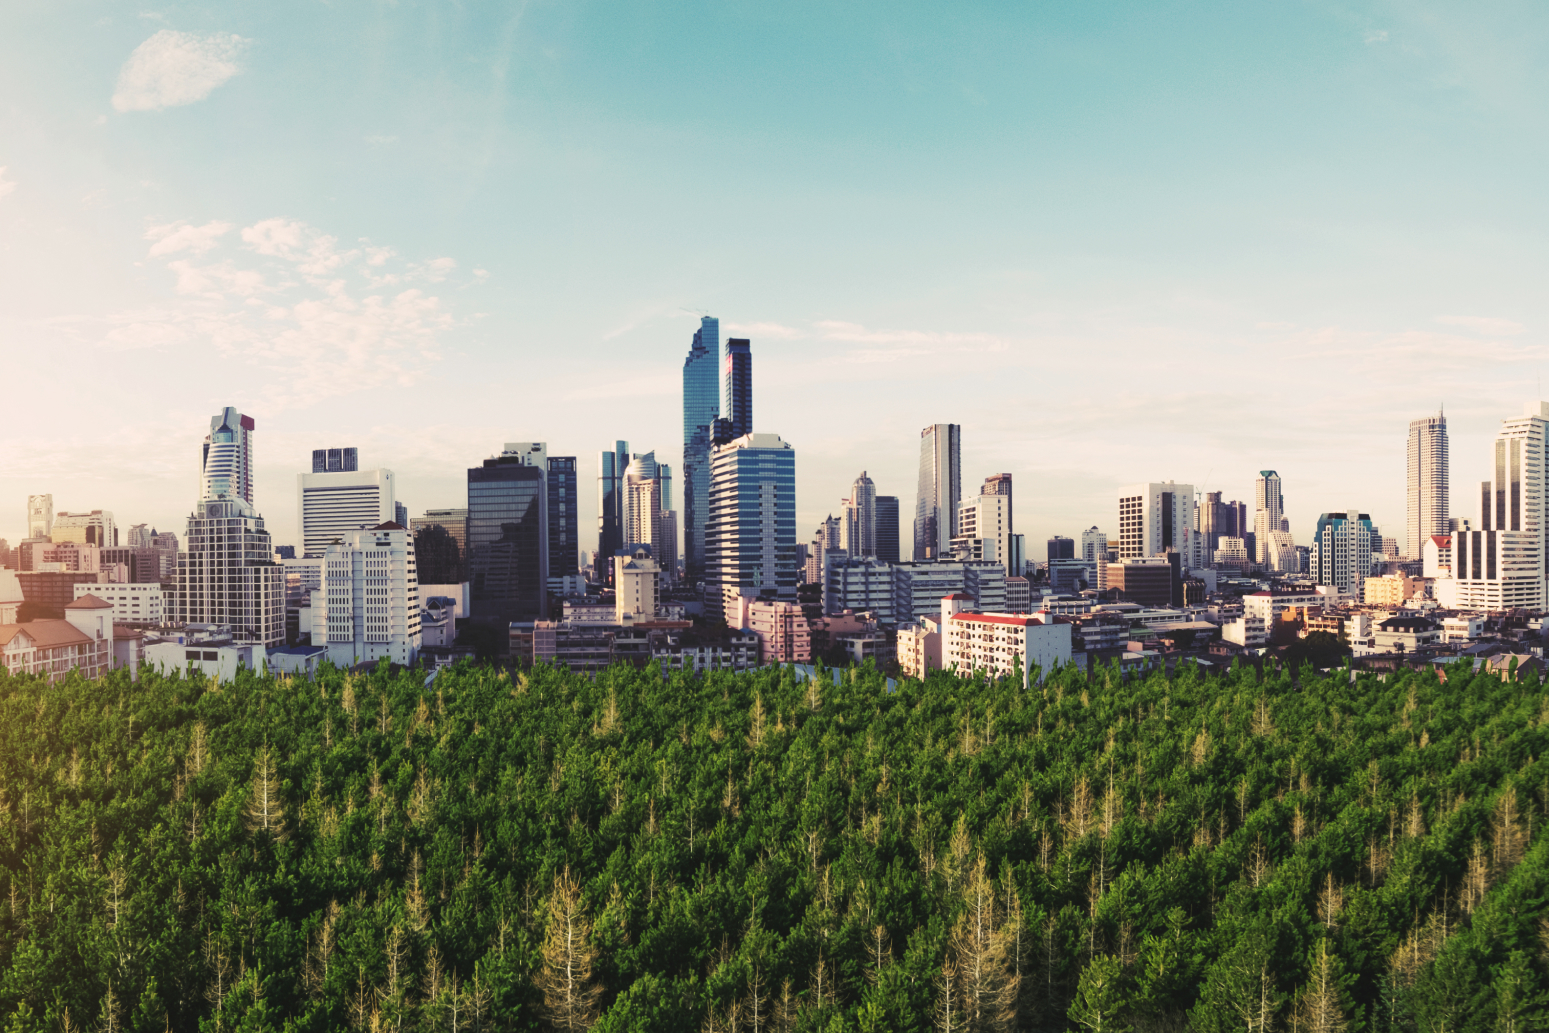 A city's skyline with a lot of trees at the bottom of the image with a lot of green